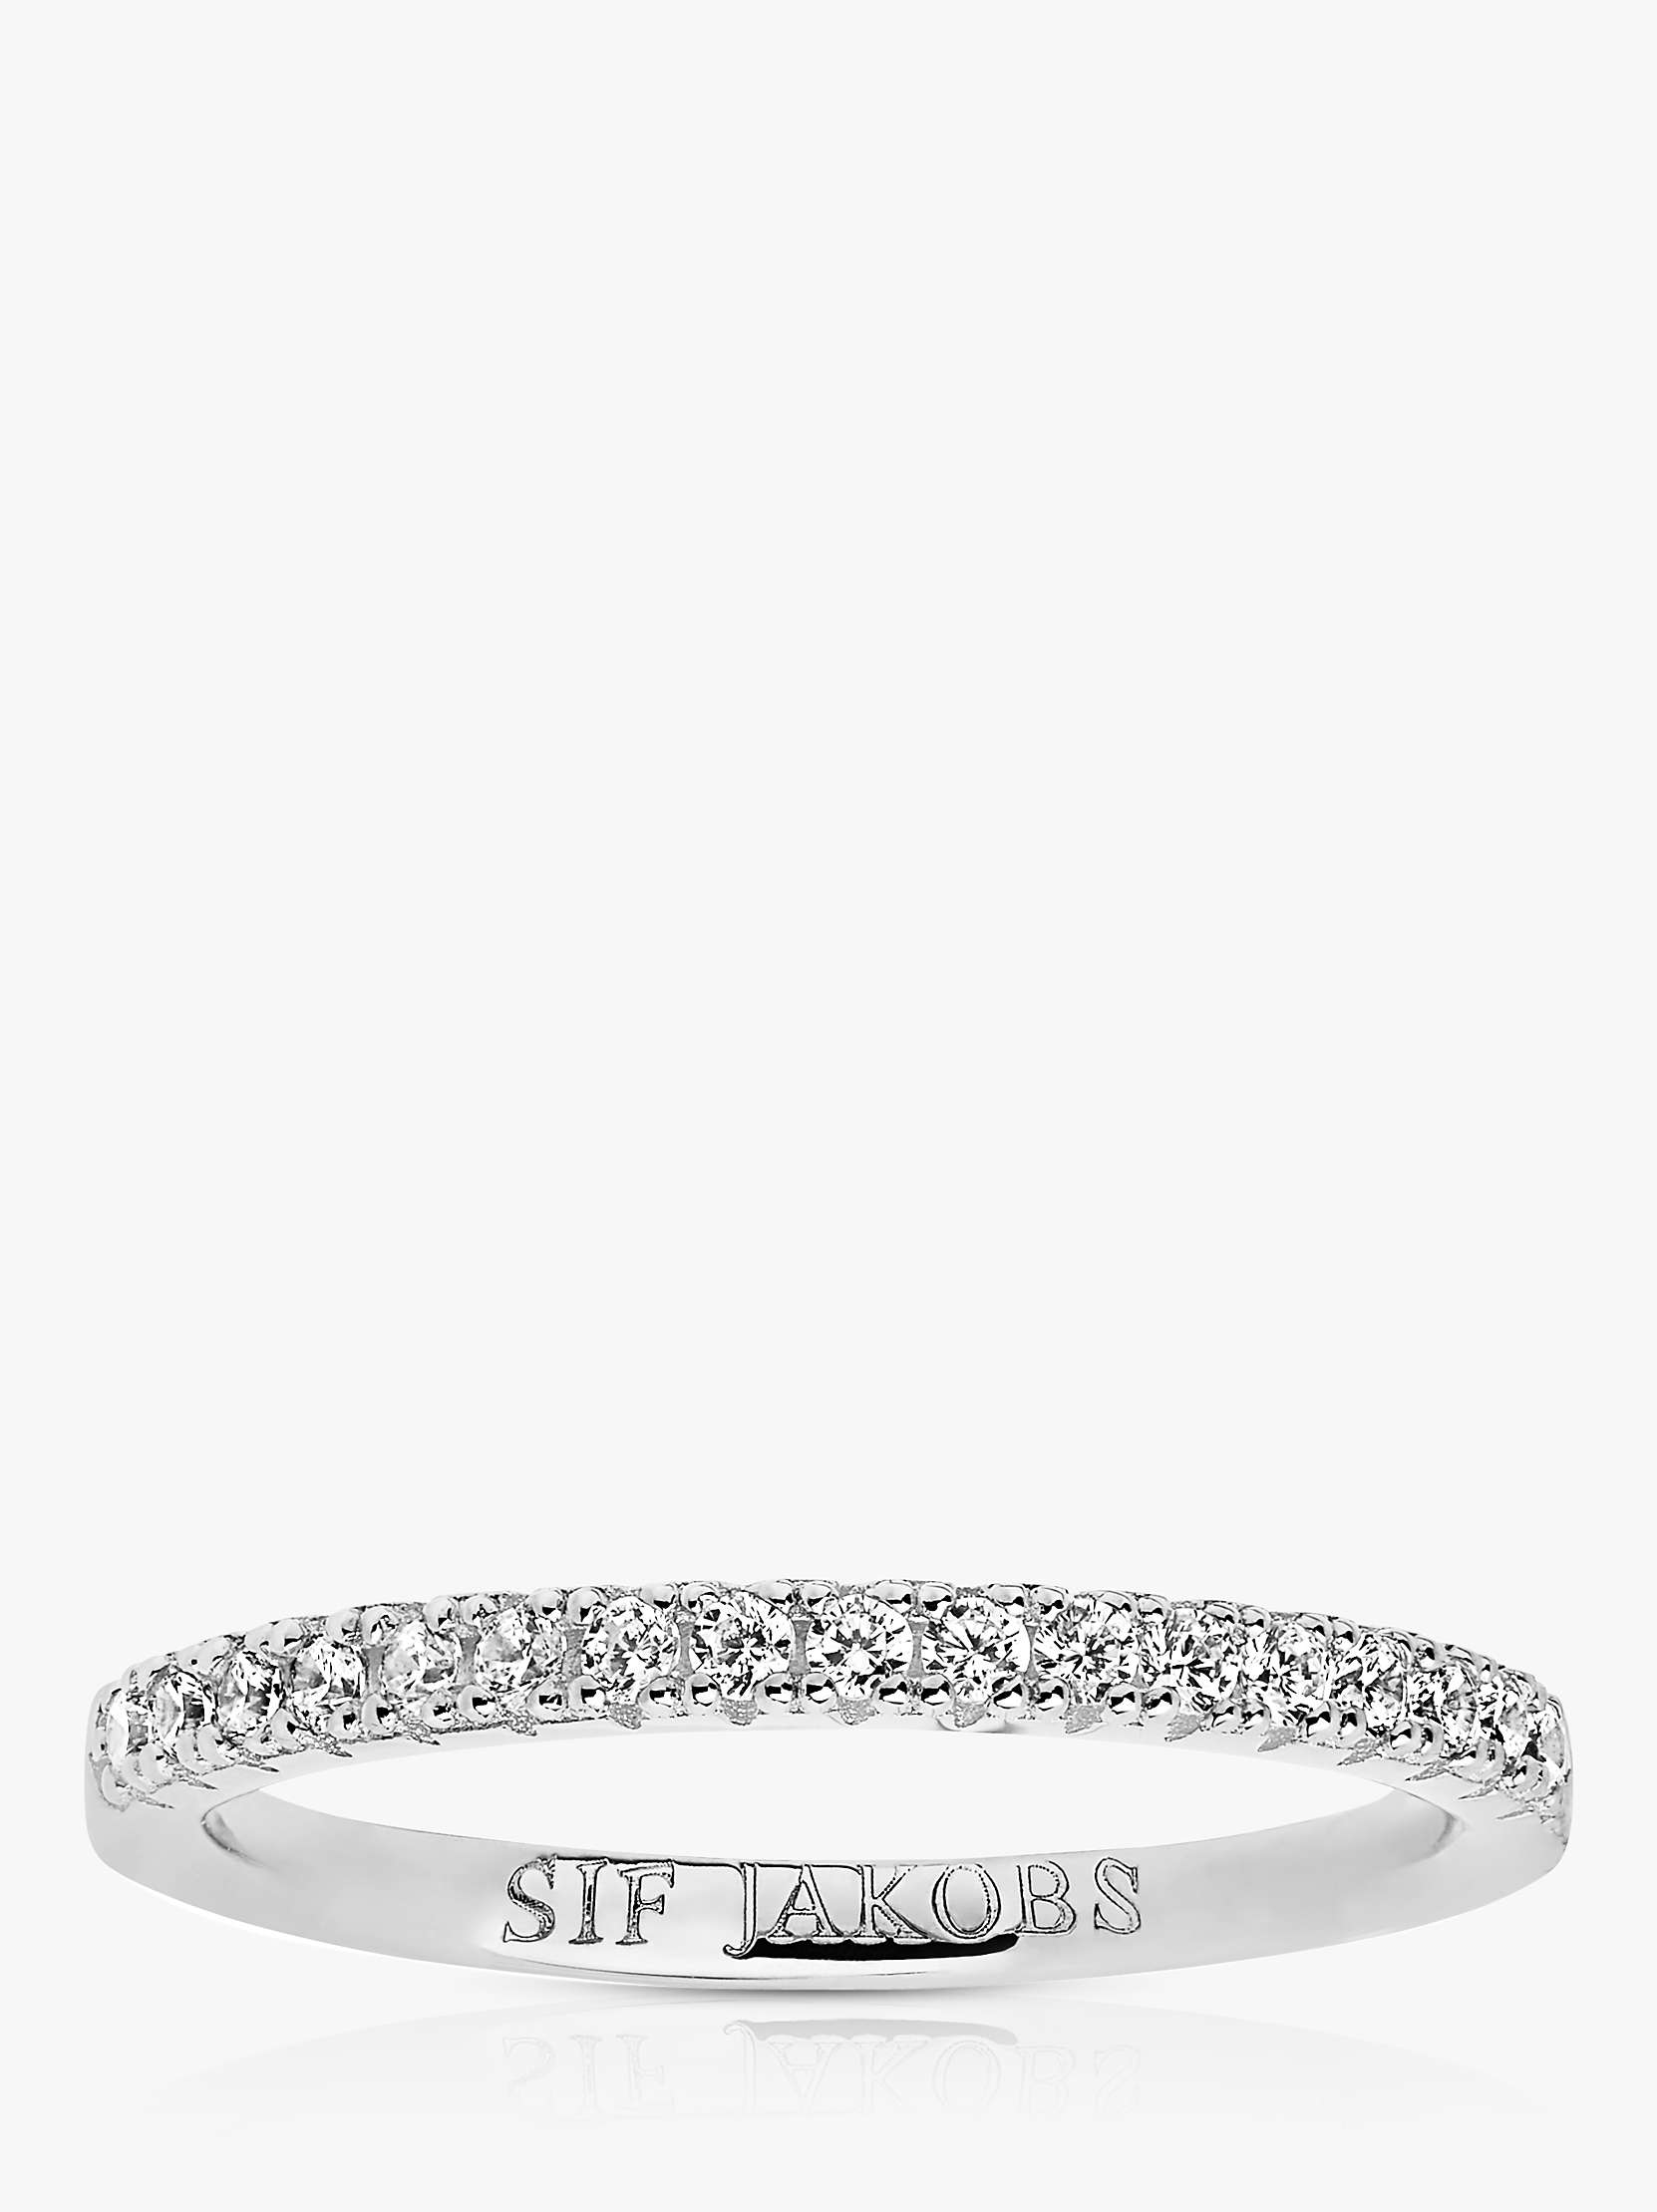 Buy Sif Jakobs Jewellery Ellera Cubic Zirconia Band Ring, Silver Online at johnlewis.com